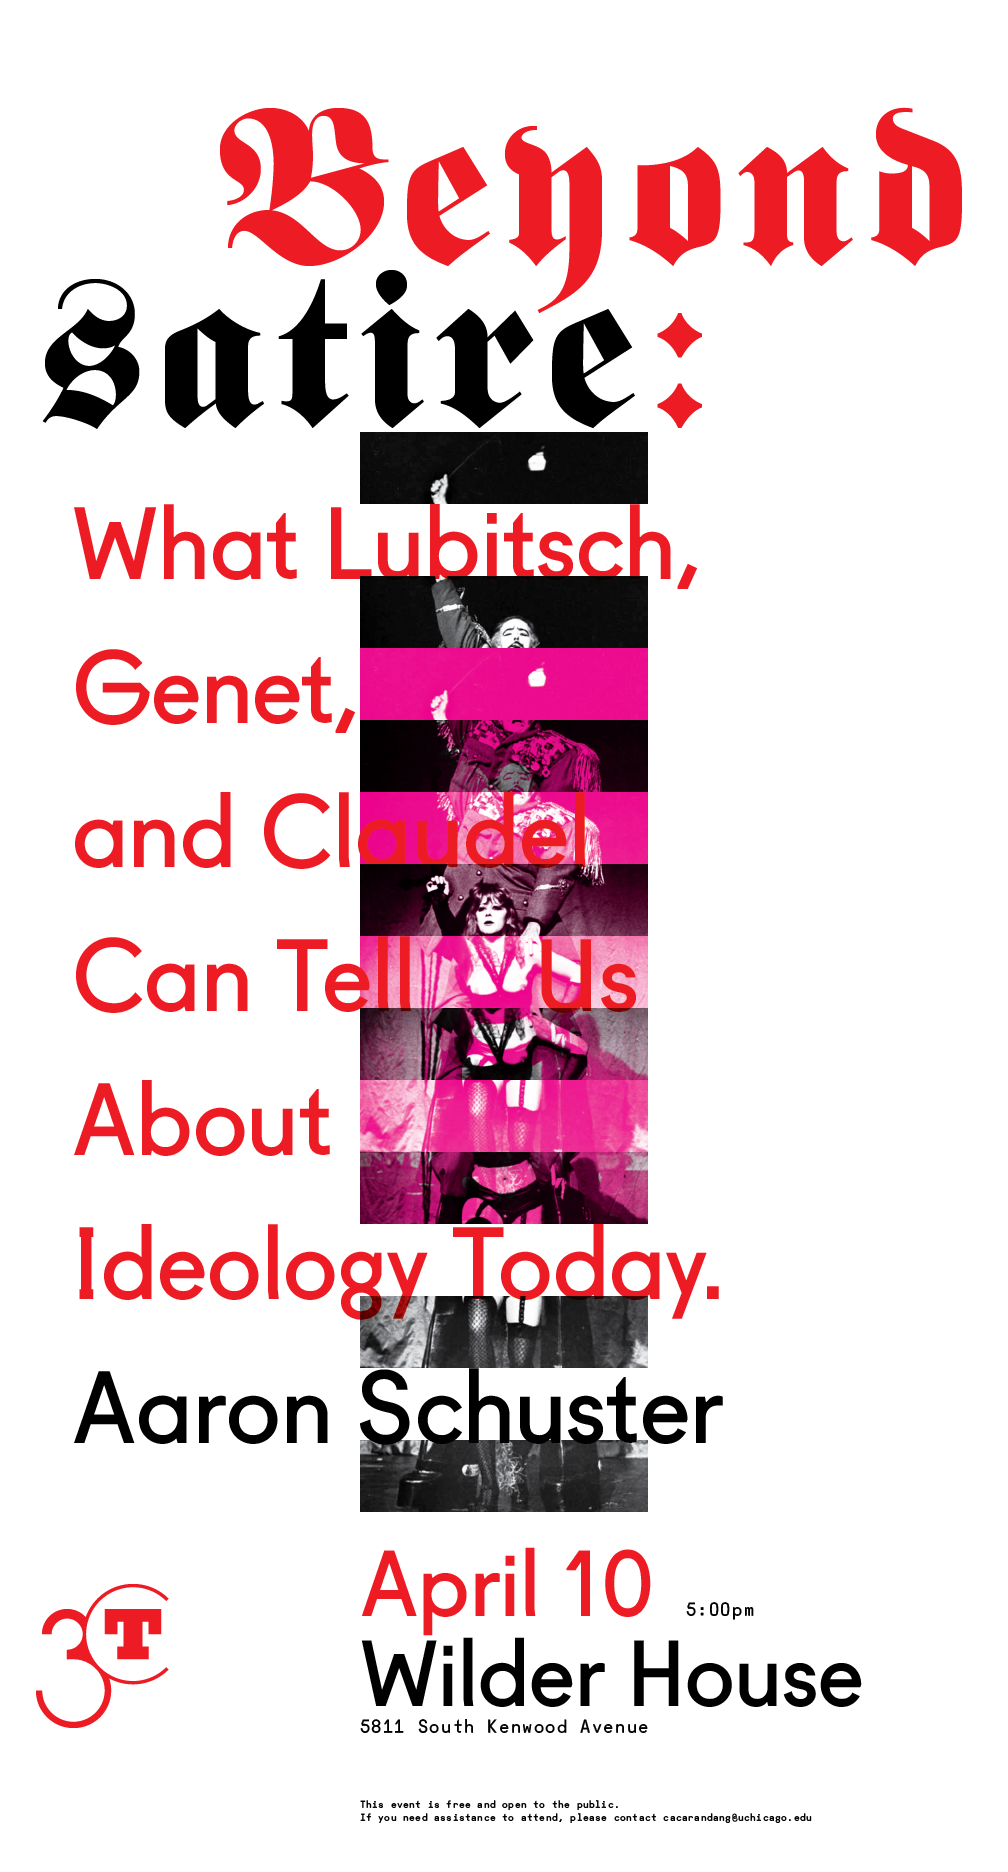 poster for Aaron Schuster, Beyond Satire event at 3CT